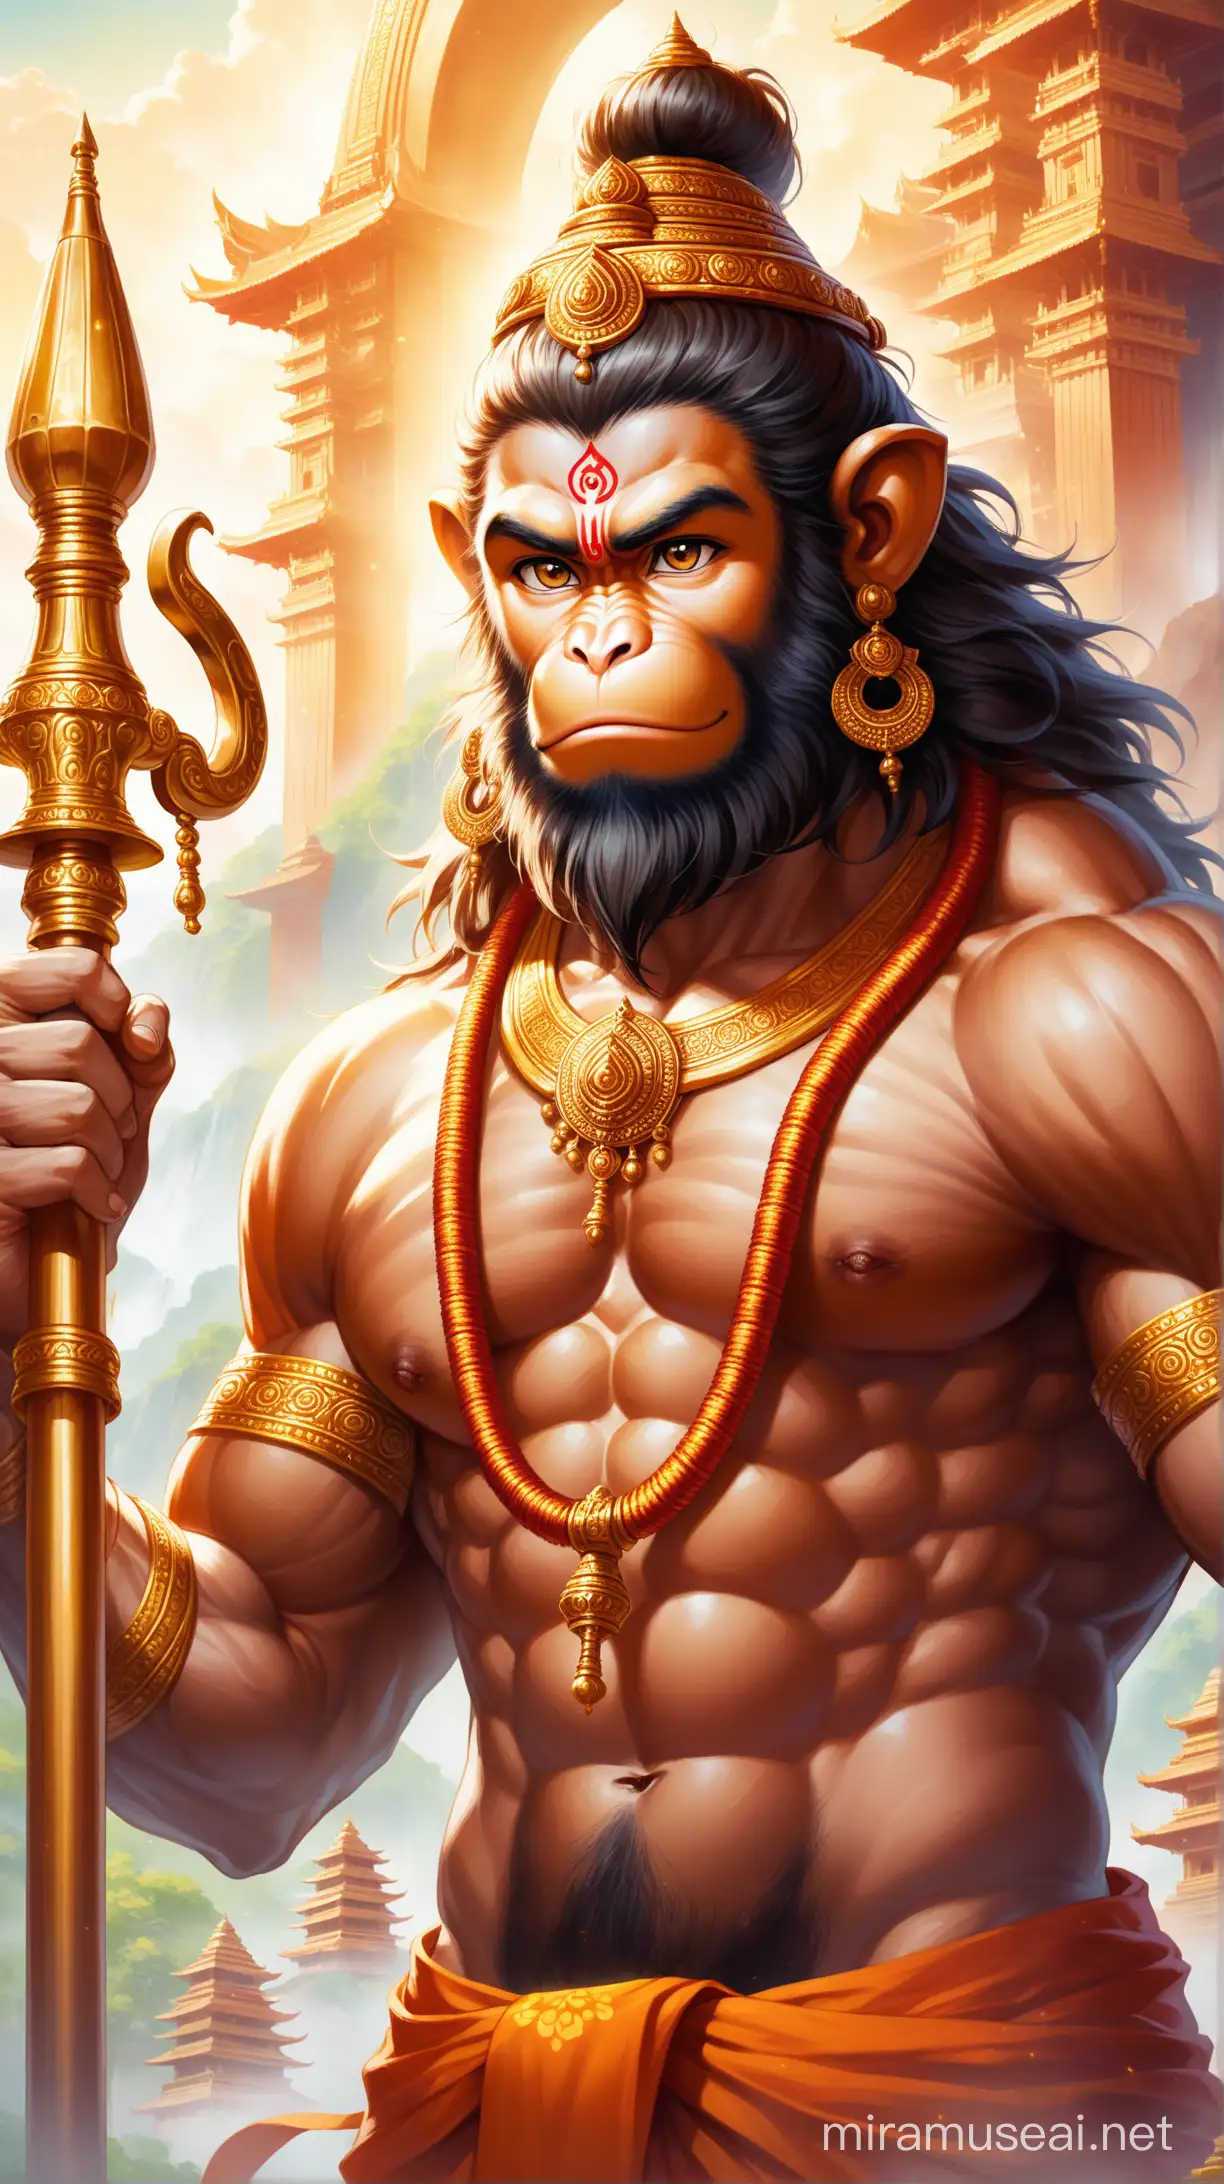 Divine Lord Hanuman Portrait with Mace in Temple Setting